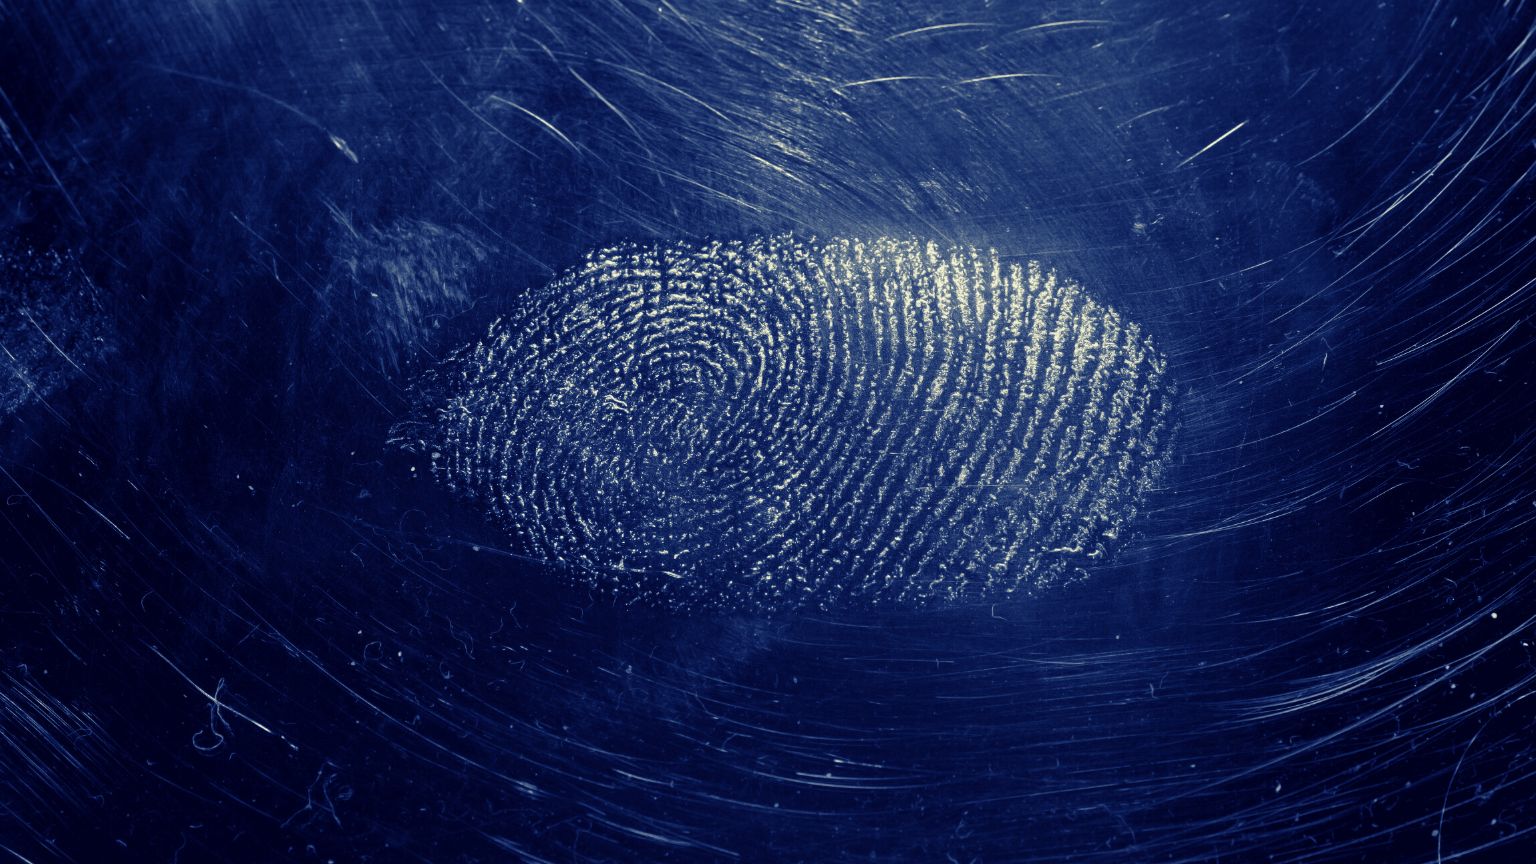 Visitors to the EU will soon have to give up their fingerprint, have their photo taken